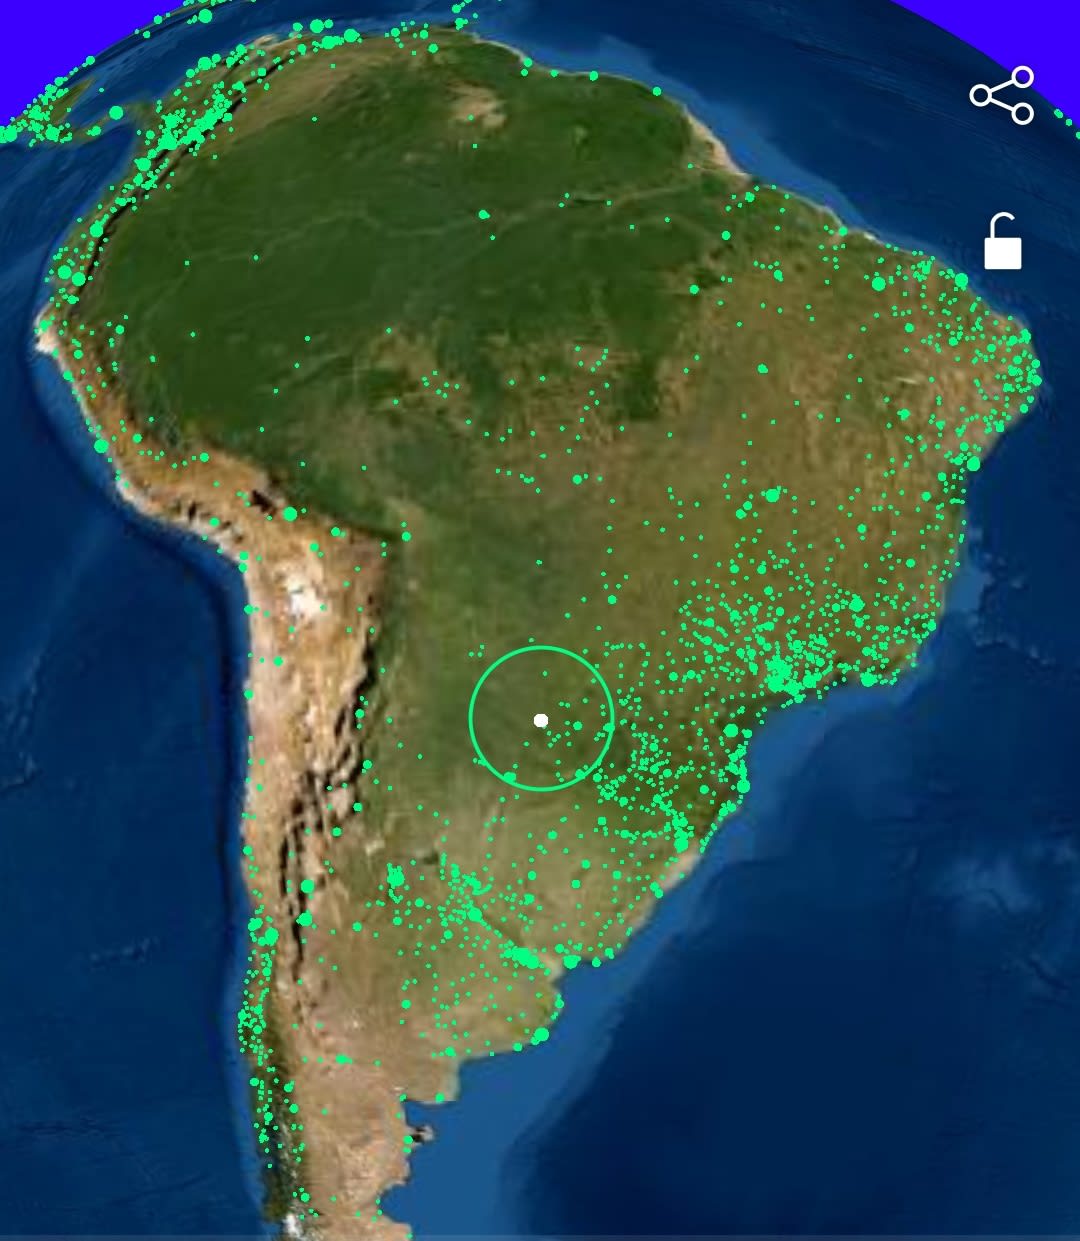 The green dots on this Google Earth map represent radio stations all over the world. Click on any one of the dots and you will immediately hear that station with very good reception. Link 👉 http://radio.garden/